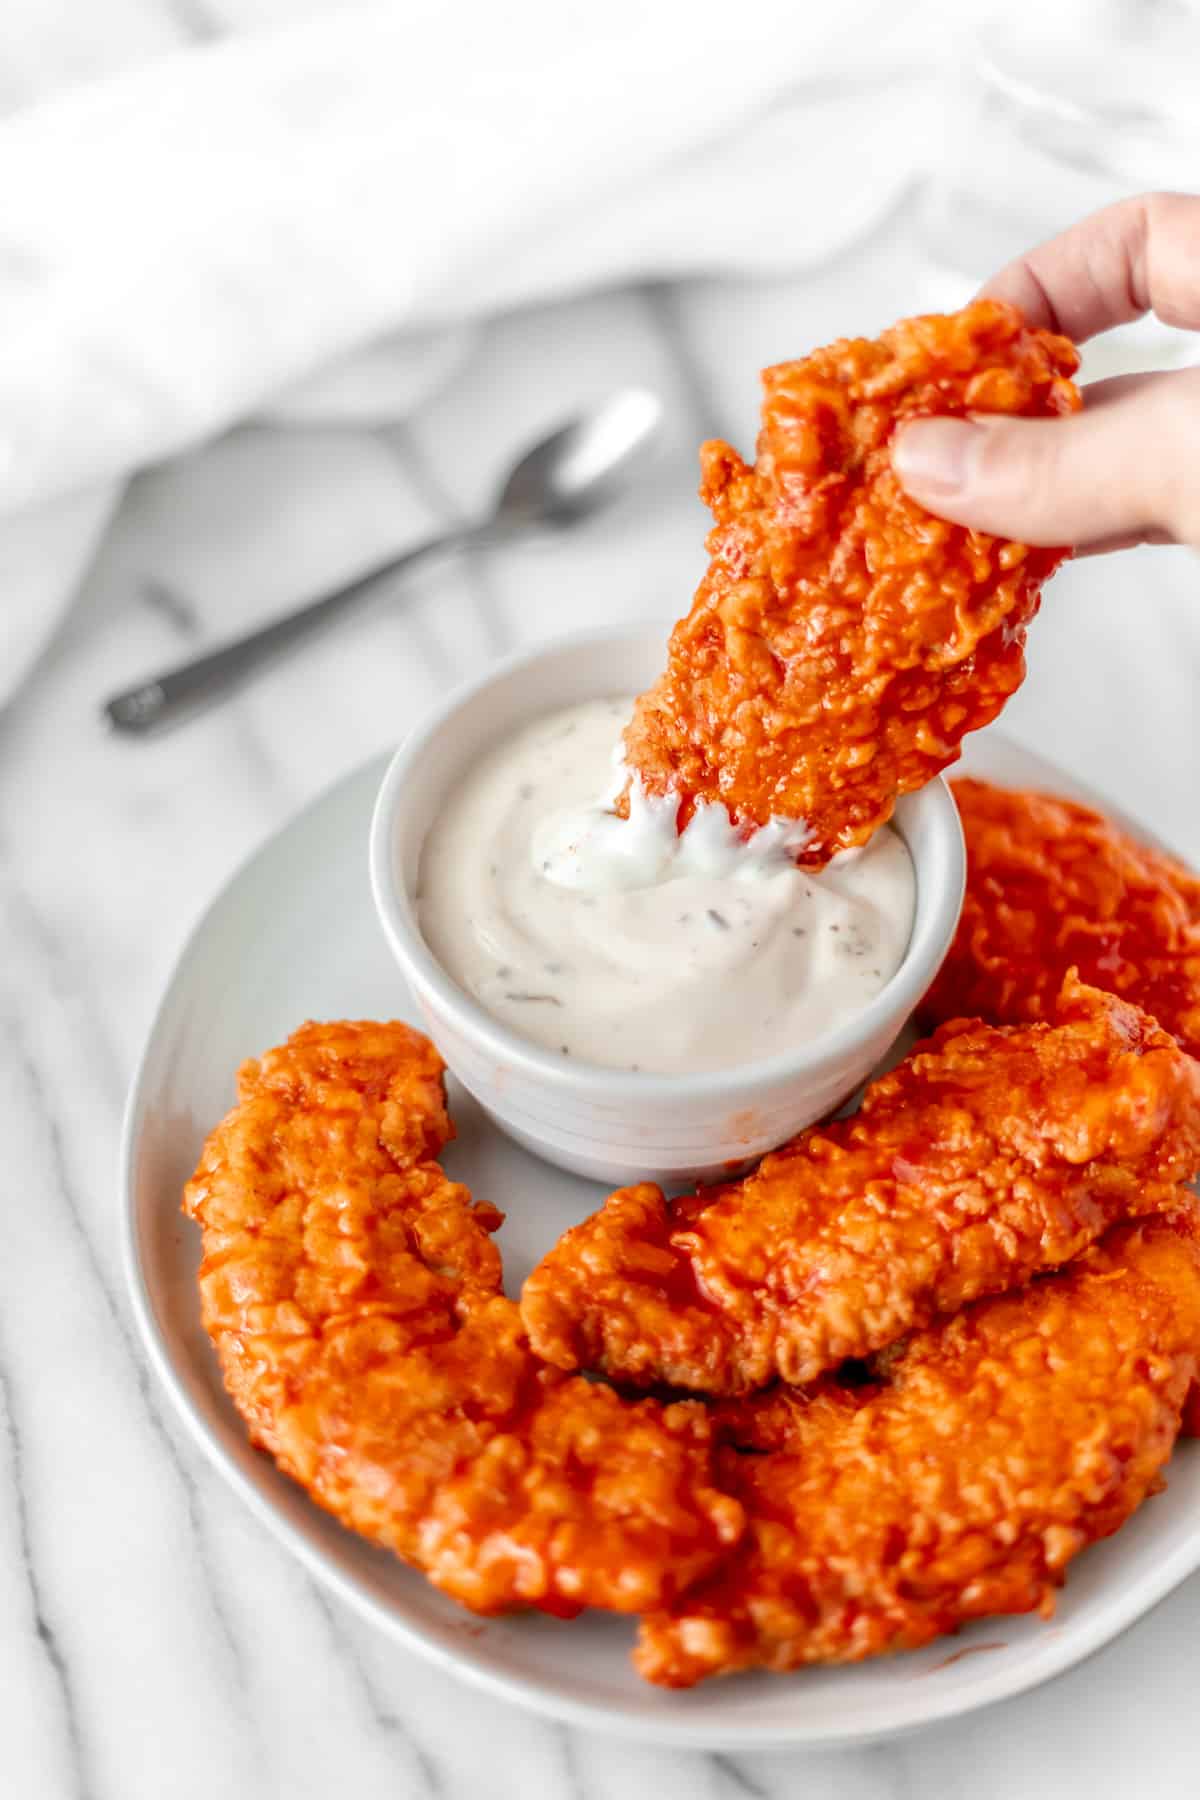 A buffalo chicken tender being dipped into ranch dressing that's in a white bowl on a white plate with more buffalo chicken tenders.